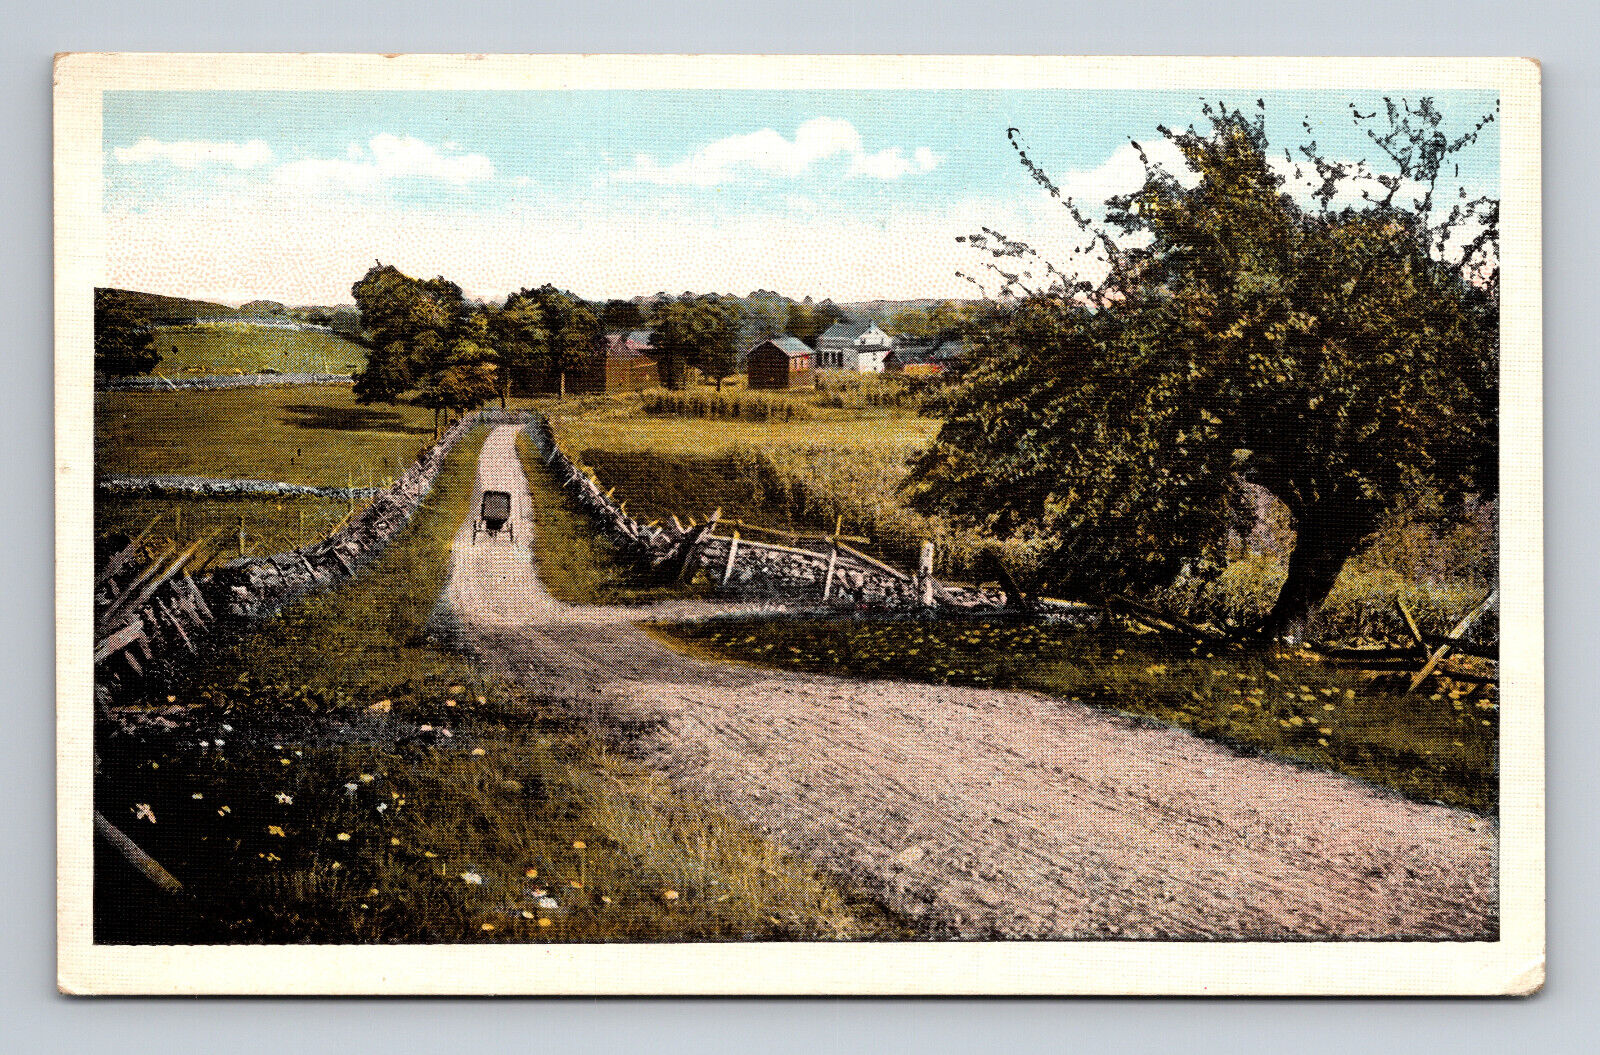 Country Road Poss Arlington Vermont Series 602 Landscapes Postcard Horse Buggy